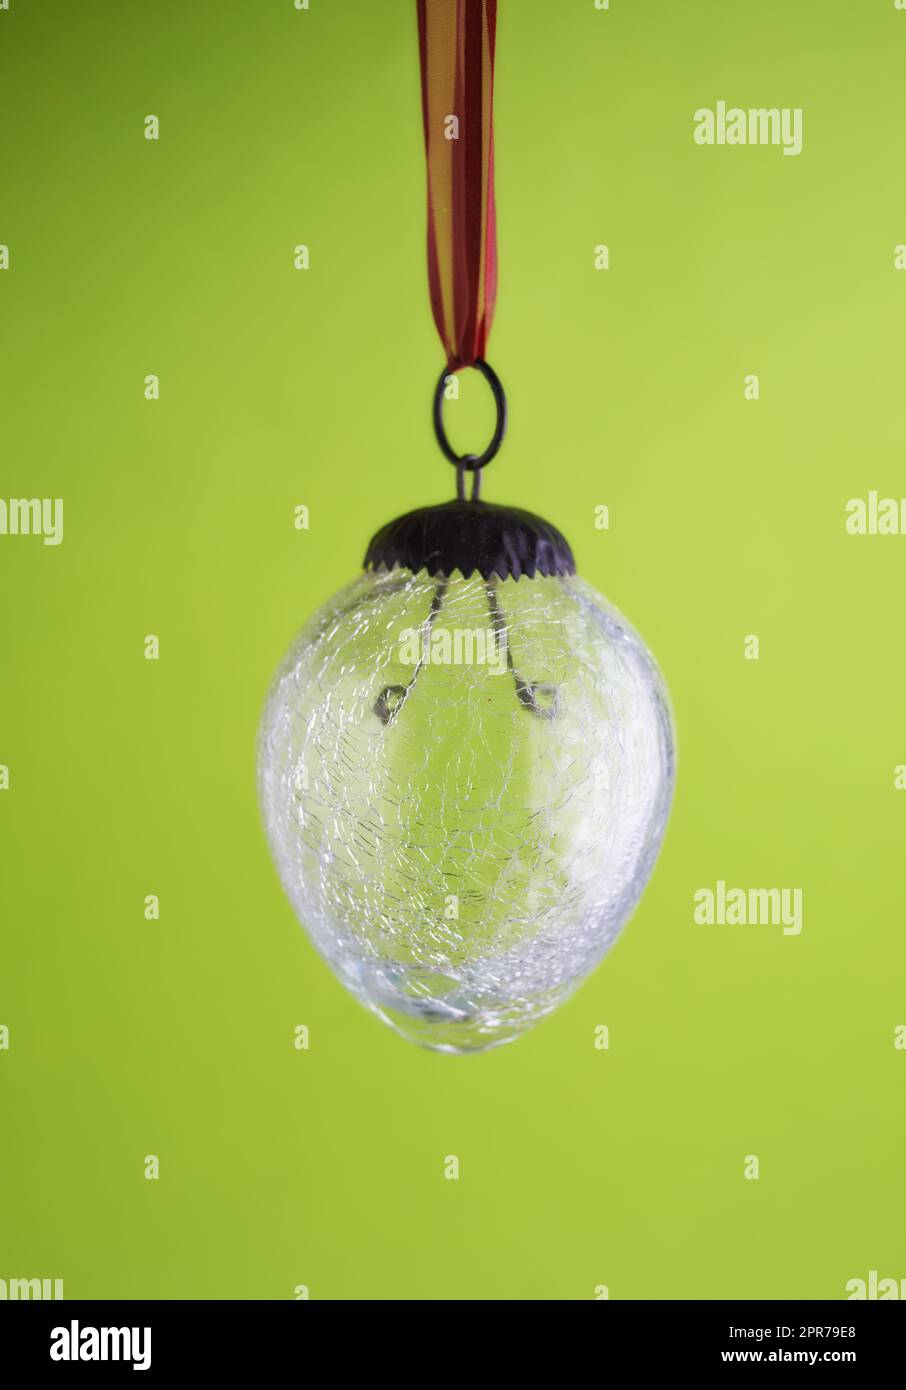 Closeup of a glass lightbulb against a green copyspace background. Zoom in on lightbulb details with no electricity to power, energy crisis, turned off for load shedding, power outage or blackout Stock Photo